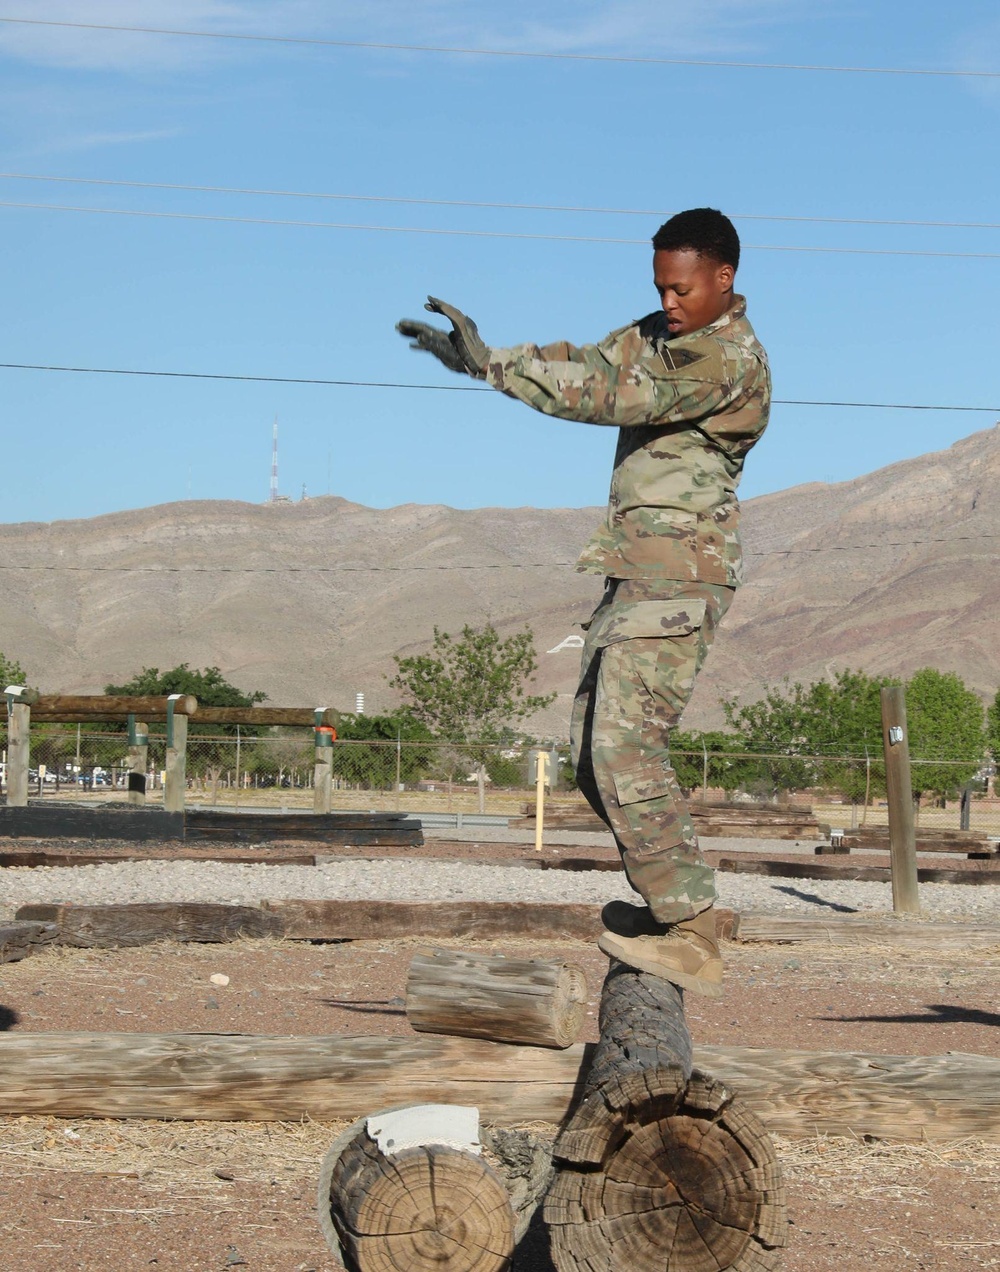 Tackling obstacles in the 1st Armored Division Iron Squad Competition